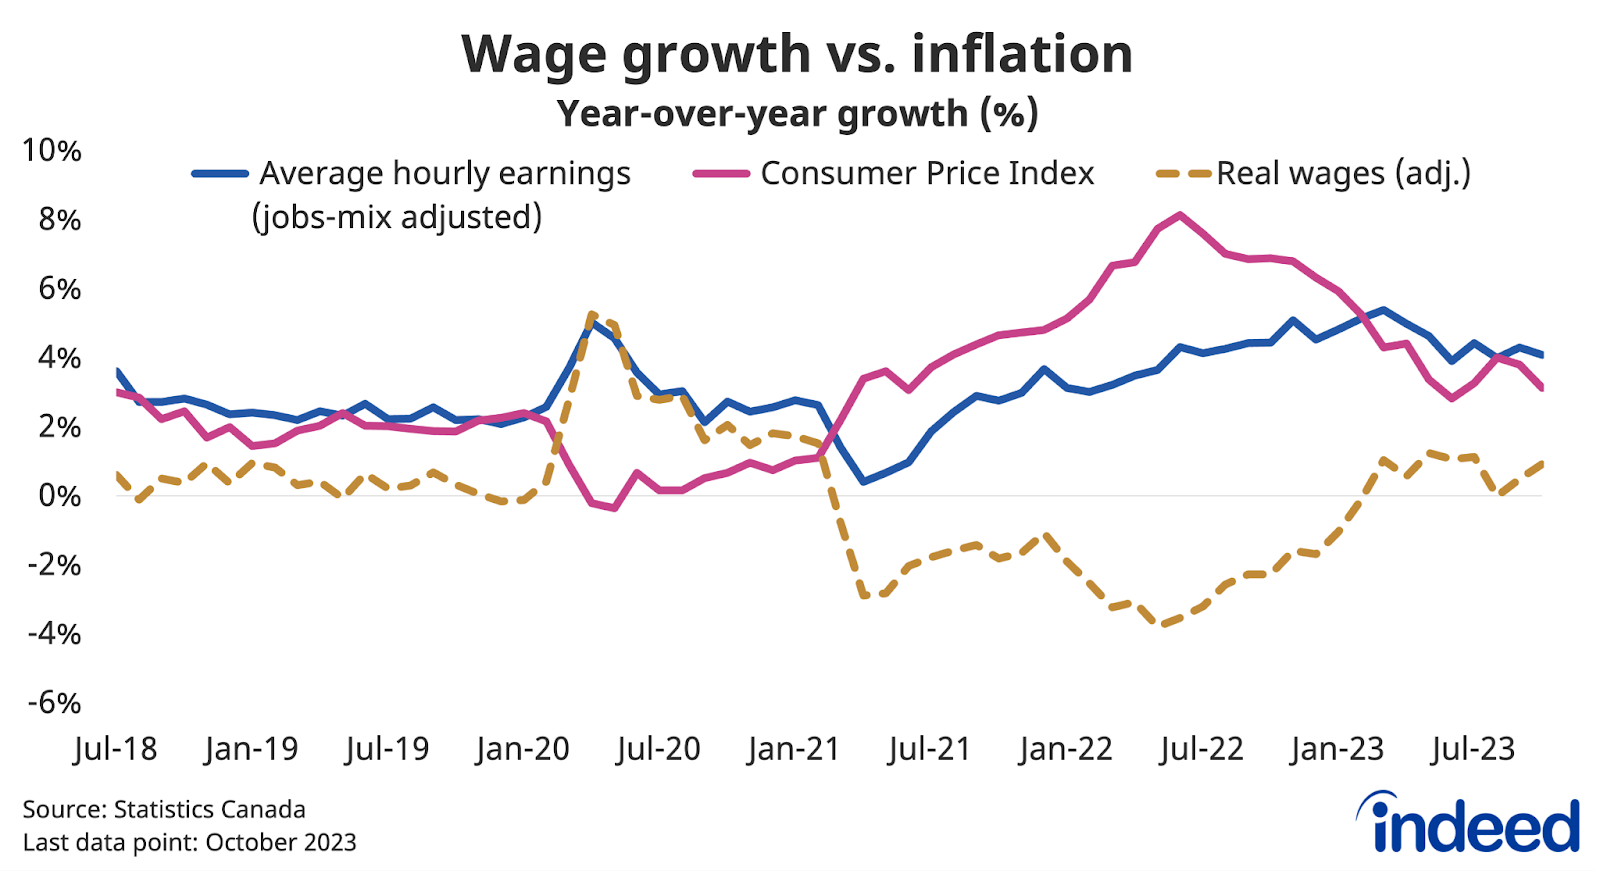 Line graph titled “Wage growth vs. inflation,” shows the pace of year-over-year growth for nominal average hourly earnings (jobs-mix adjusted), the consumer price index, and real wages between July 2018 and October 2023. Nominal wage growth has been slightly faster than inflation in recent months, but this follows two down years in 2021 and 2022. 